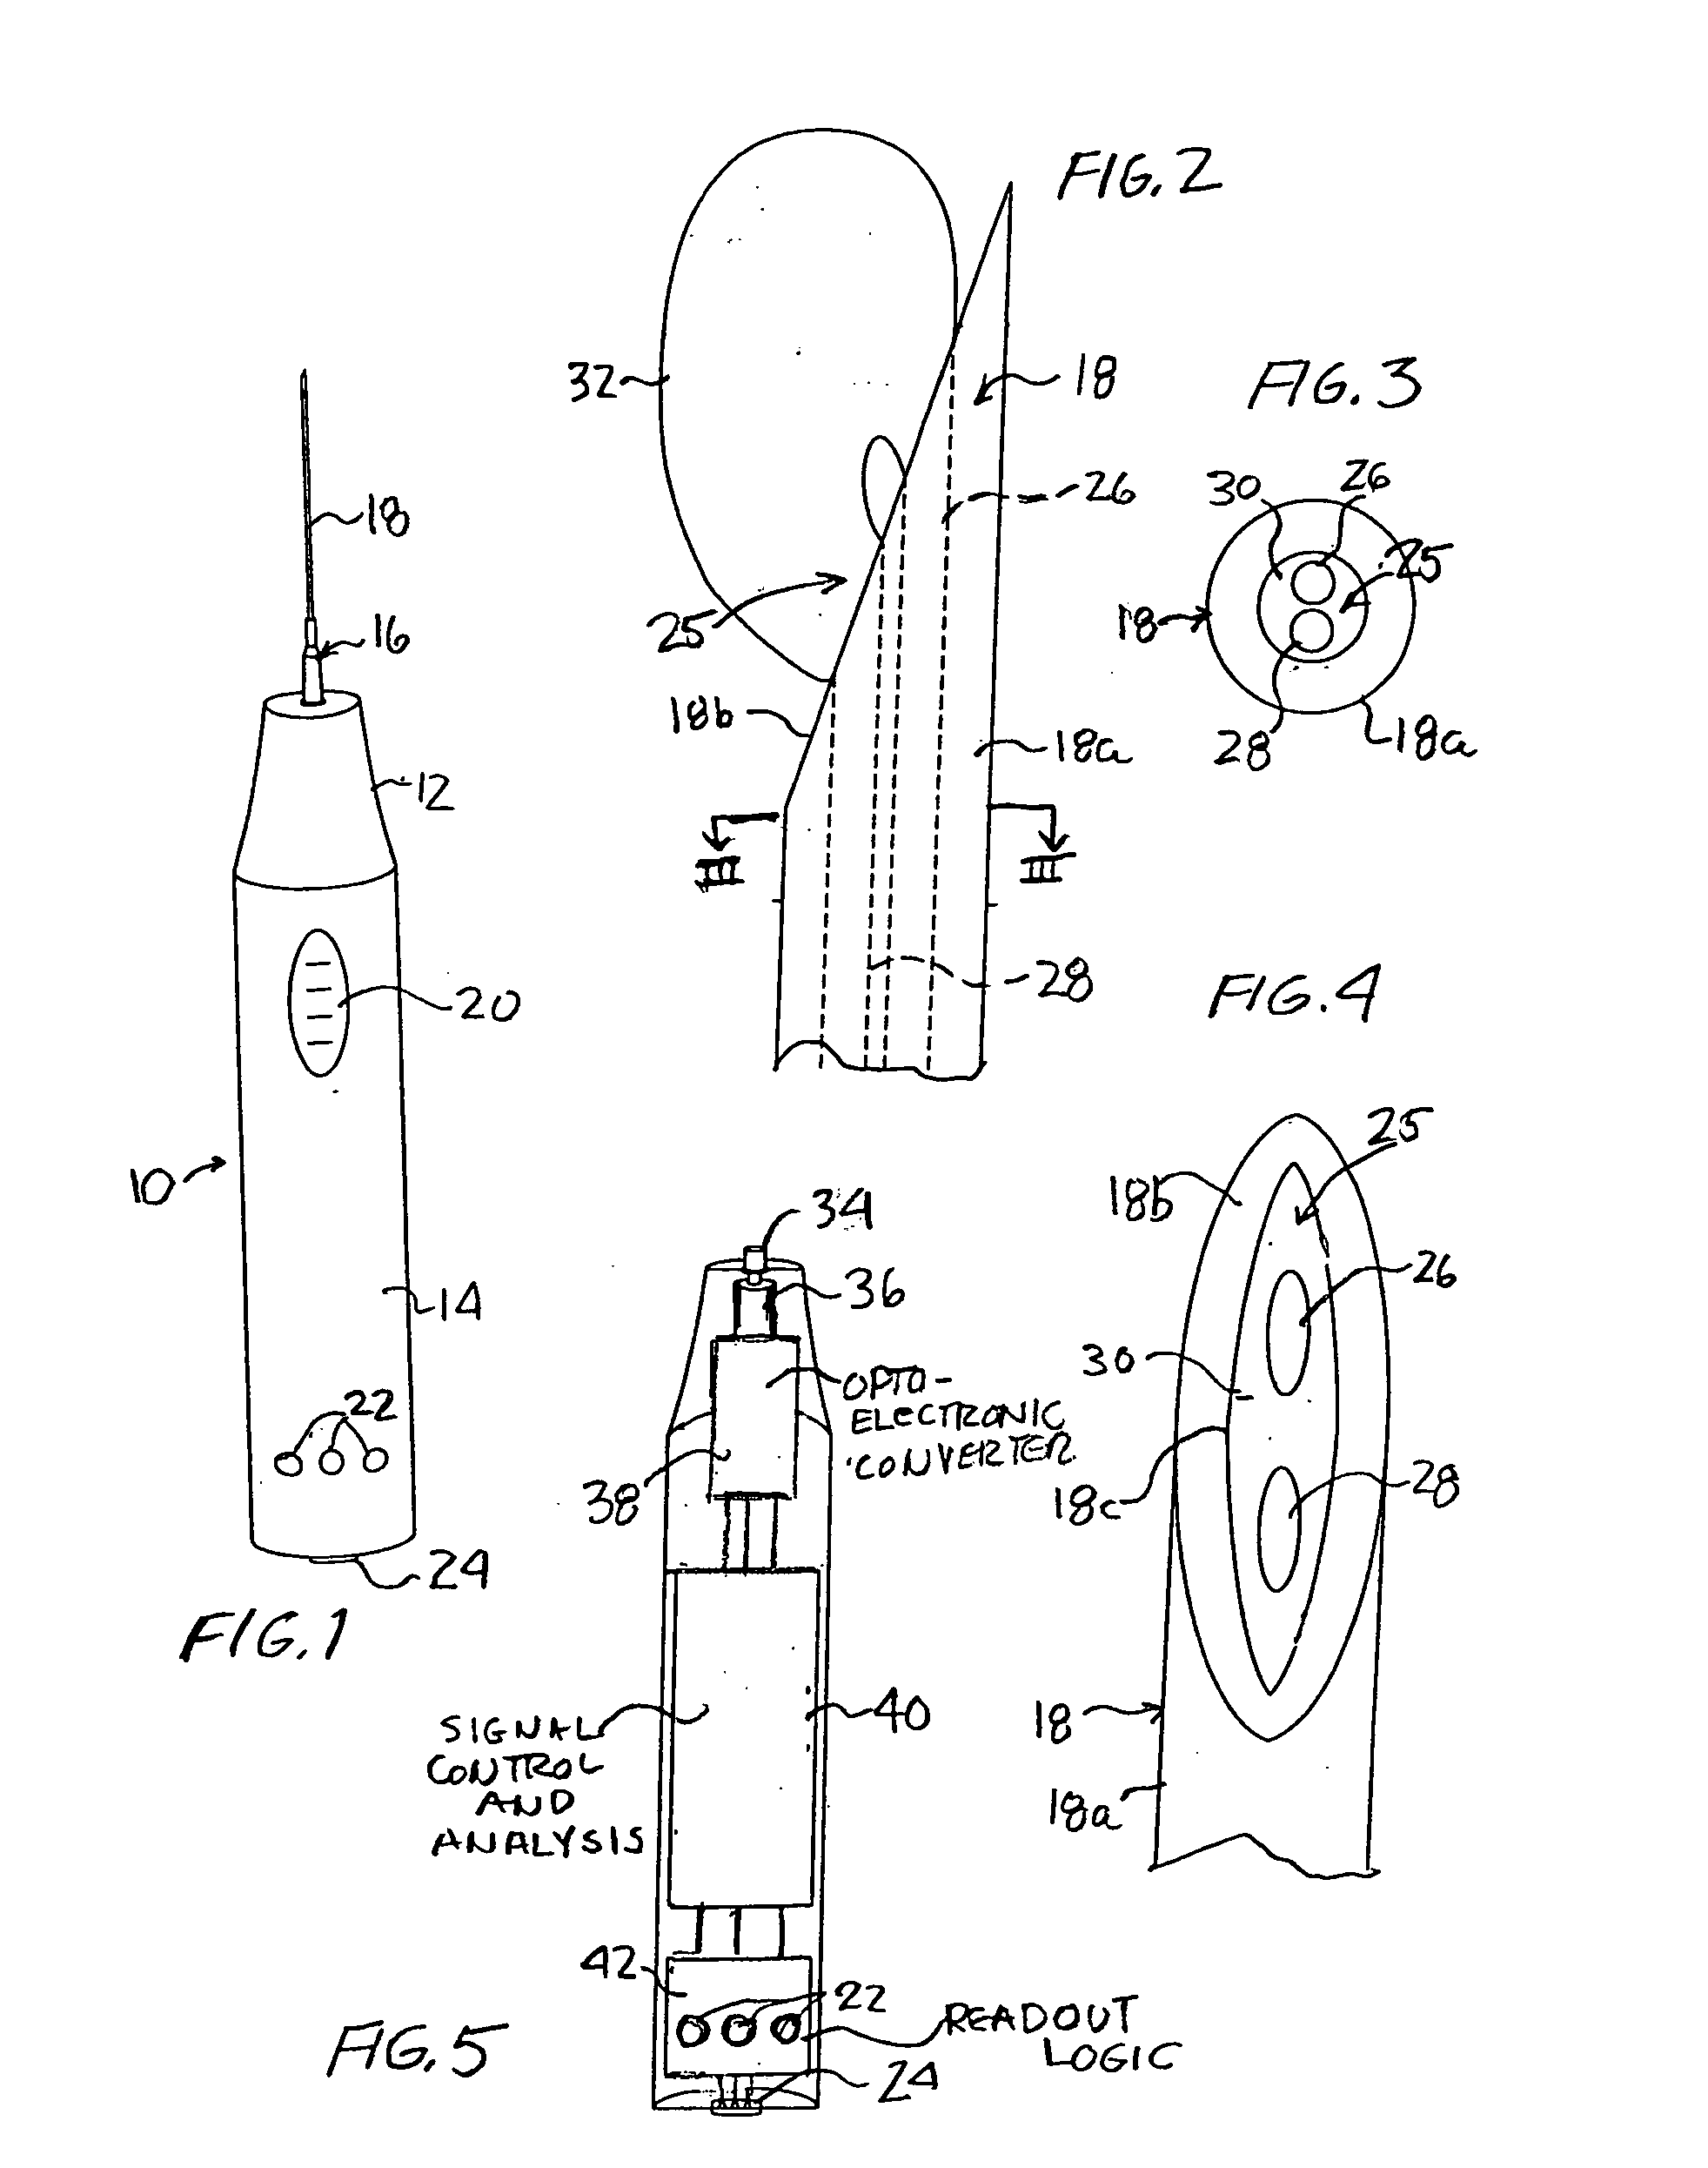 Optical device for needle placement into a joint